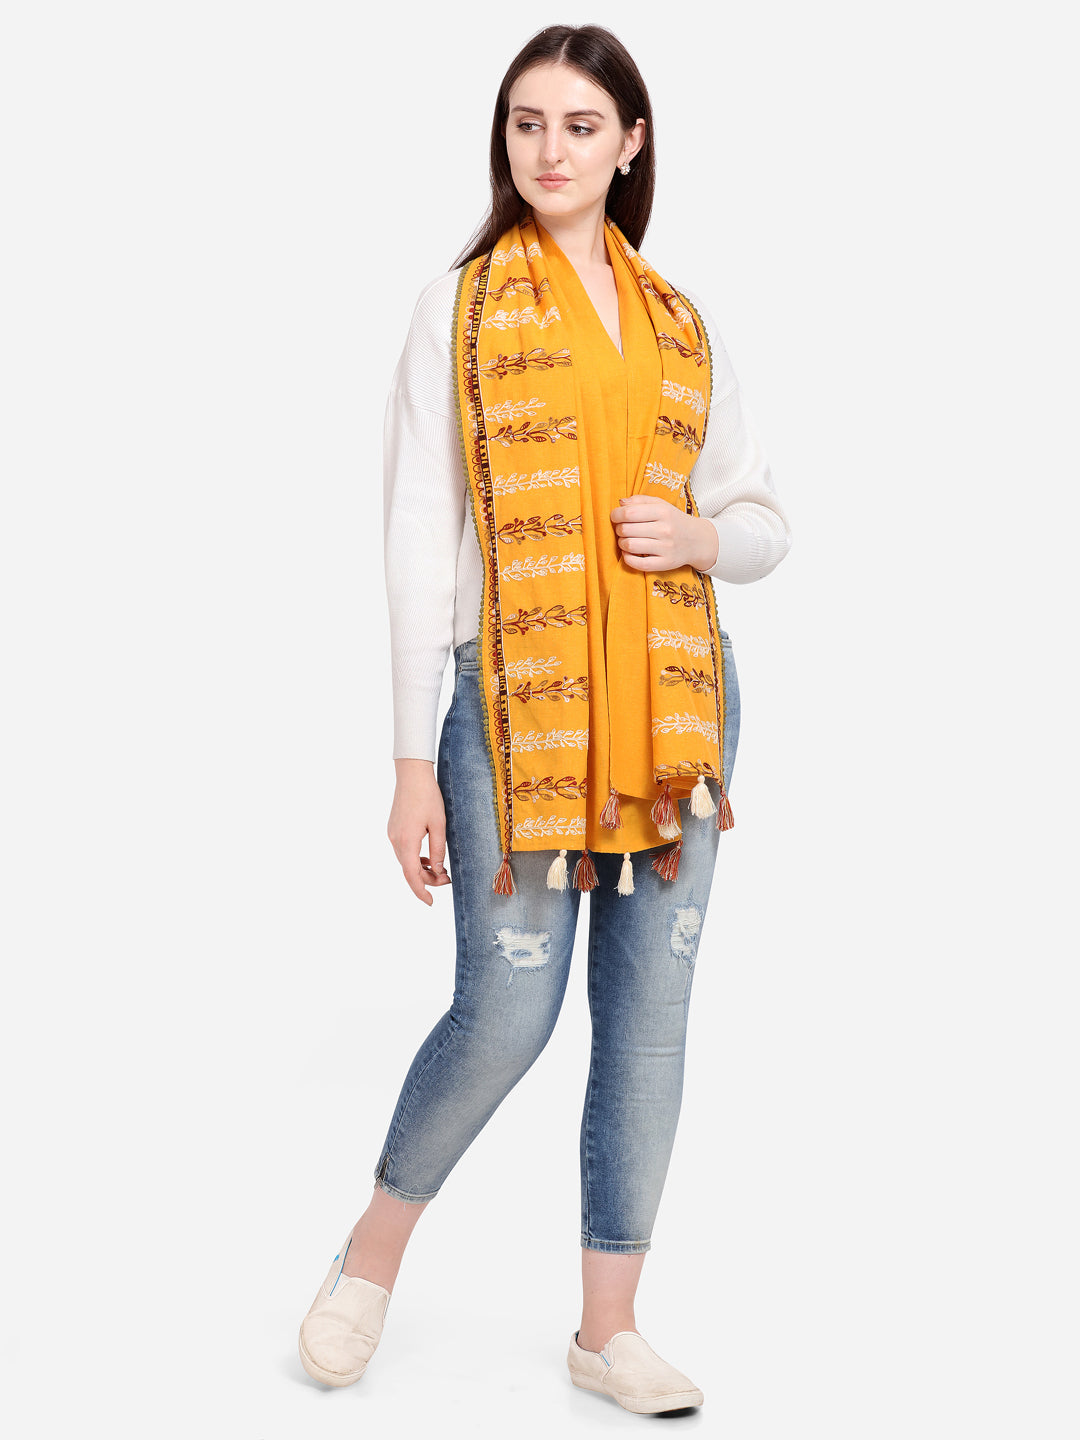 Women's   Earthy Grassroot Khadi Yellow Embroidered Stole/scarf - MESMORA FASHIONS